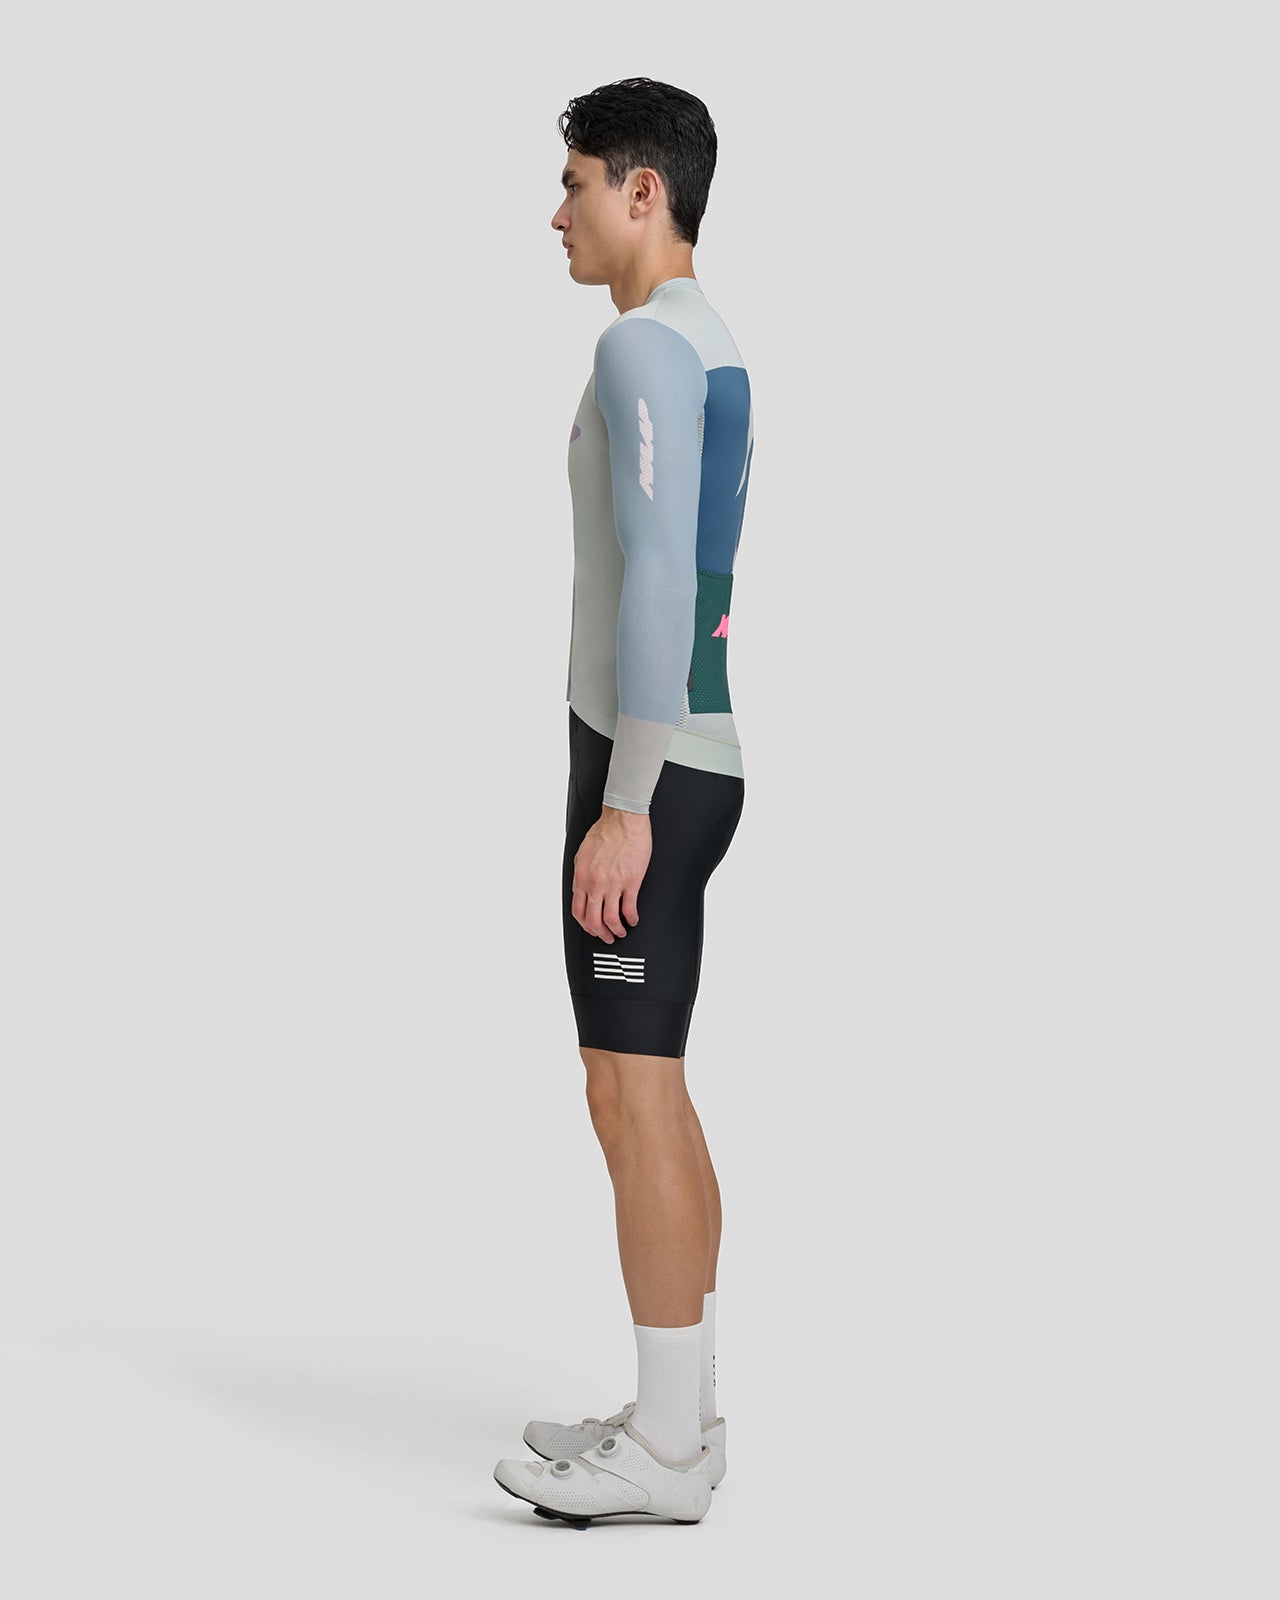 Eclipse Pro Air LS Jersey 2.0 - MAAP Cycling Apparel